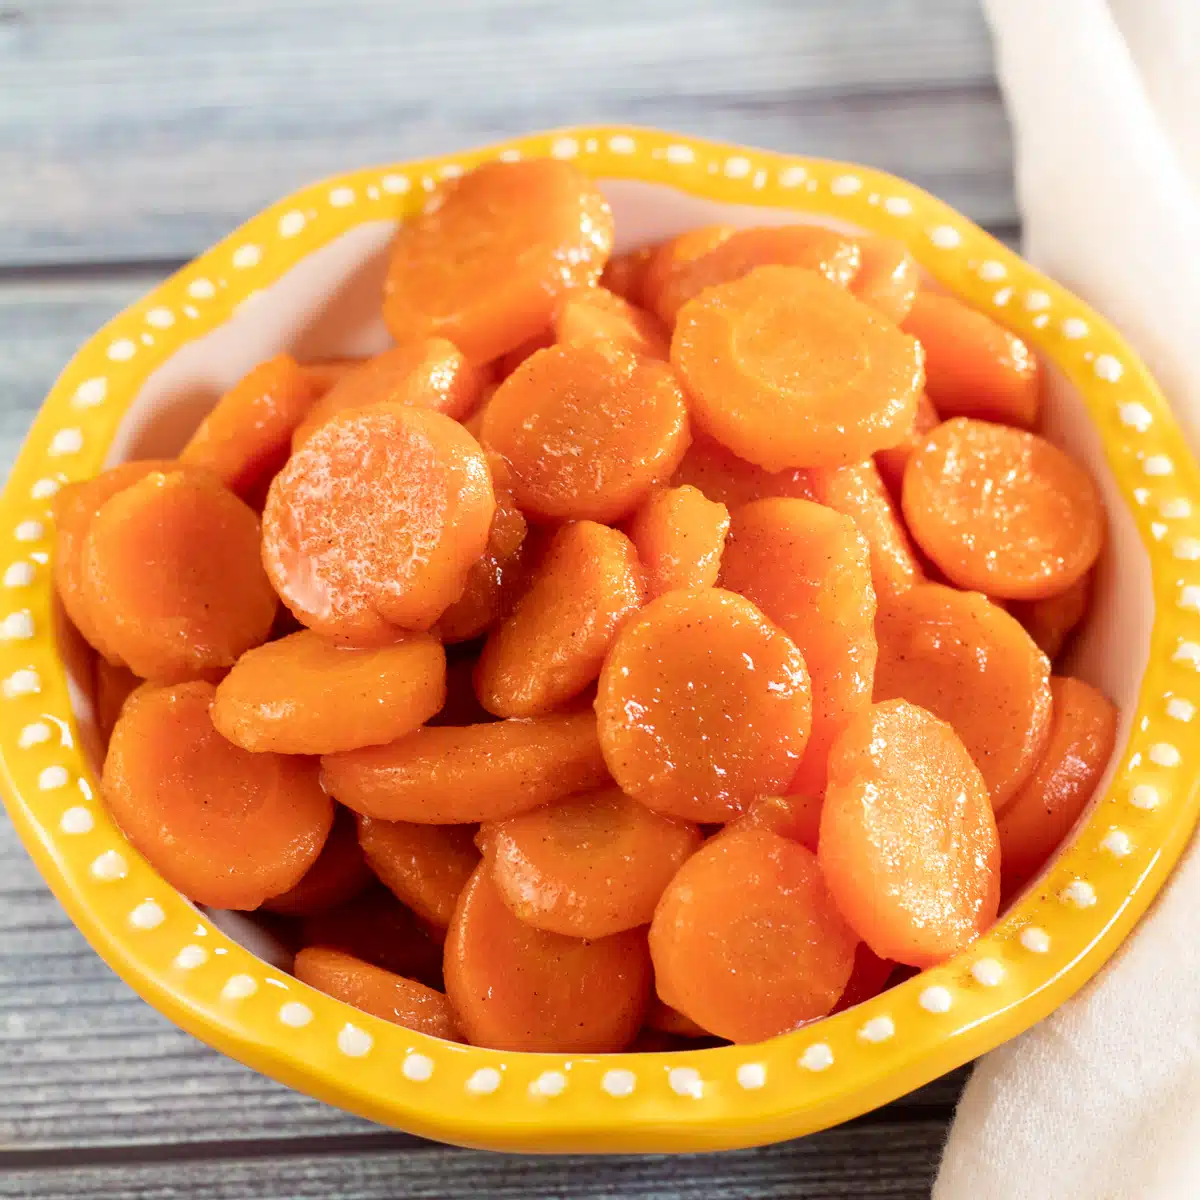 Square image showing canned cooked carrots in a bowl.